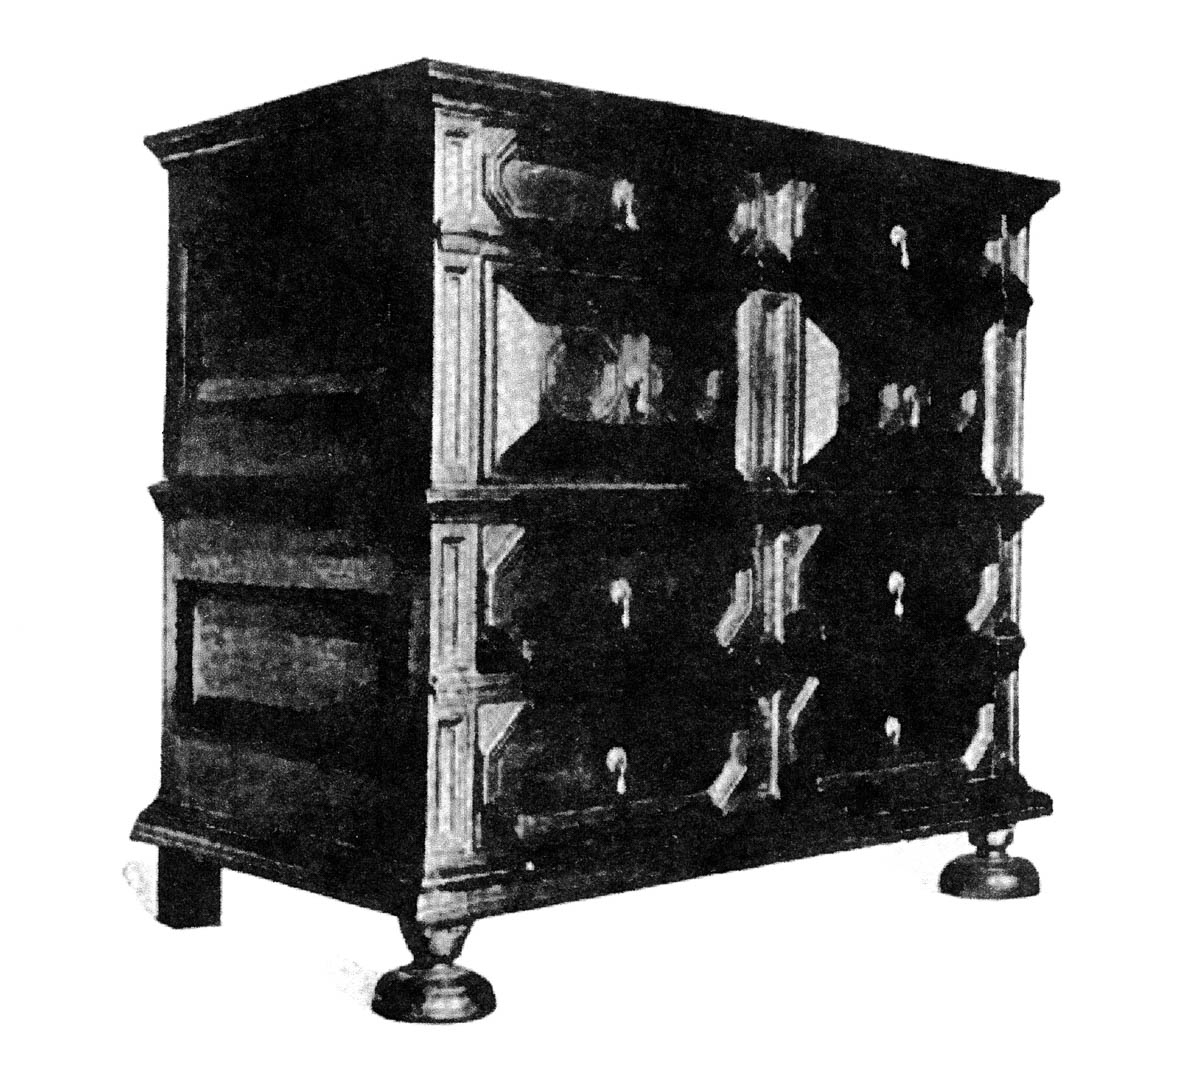 An illustration of a paneled chest of drawers with flat onion turned feet, sixteen seventy five seventeen hundred from Luke Vincent Lockwood’s nineteen twenty six book, “Colonial Furniture in America.”